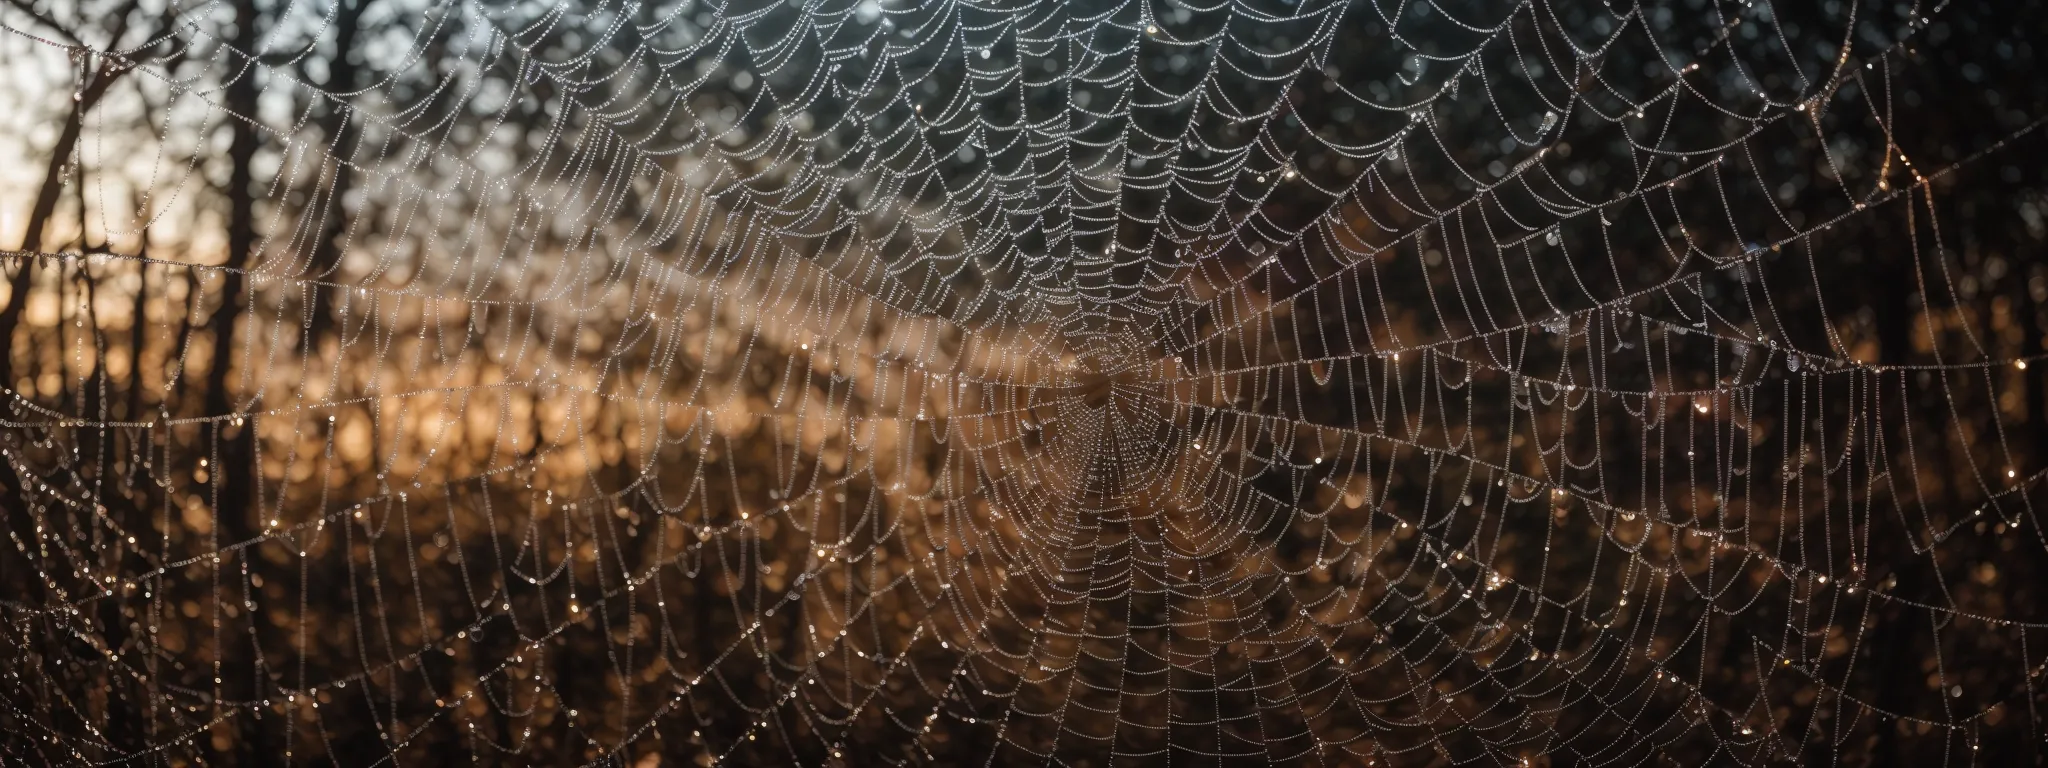 a close-up of a spider web glistening with dew at dawn, symbolizing the intricate connections in seo link building.